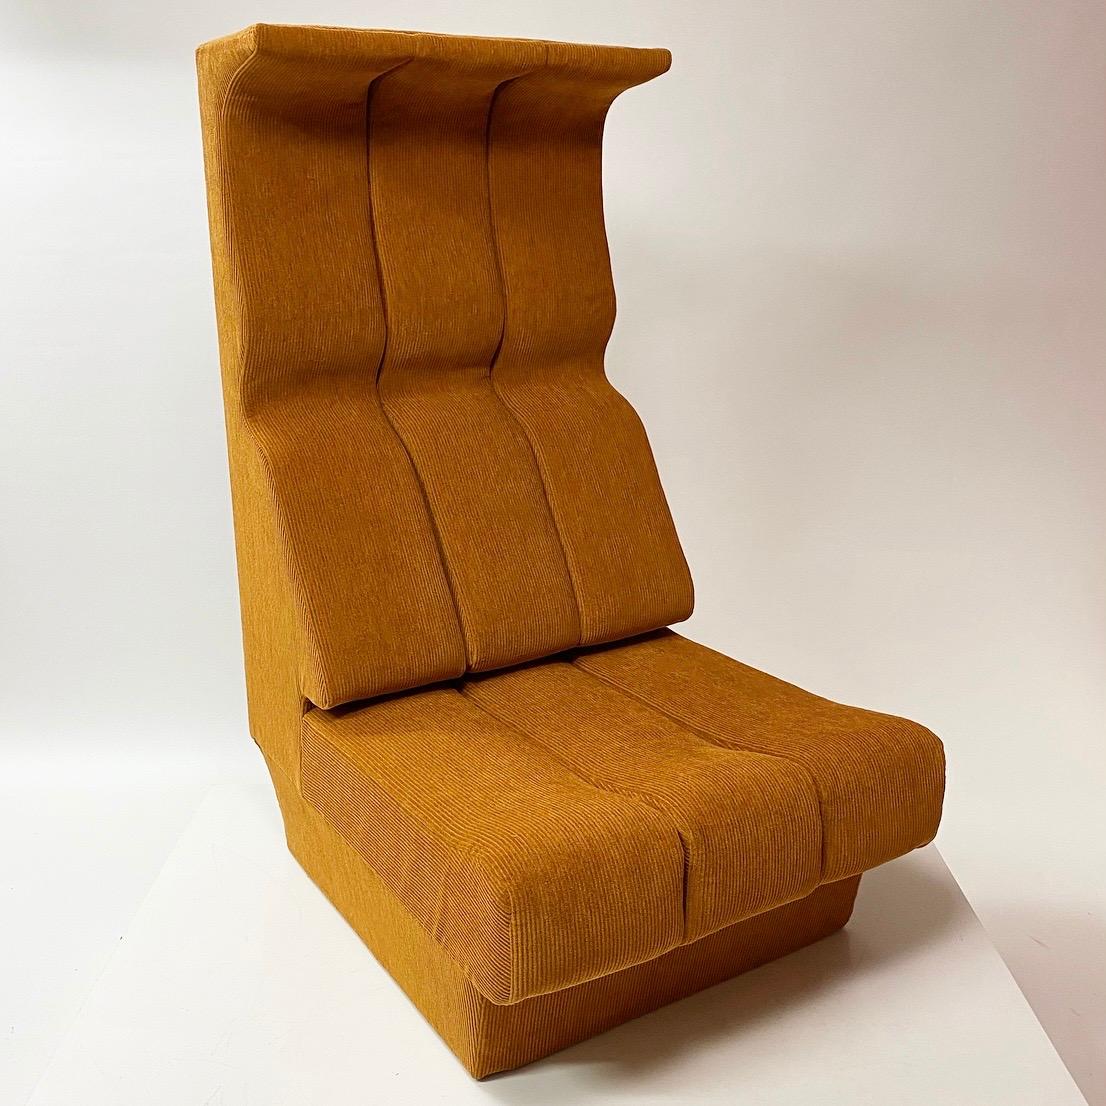 Interlübke Highback Space Age Seat with New Upholstery, Germany, 1970 For Sale 1